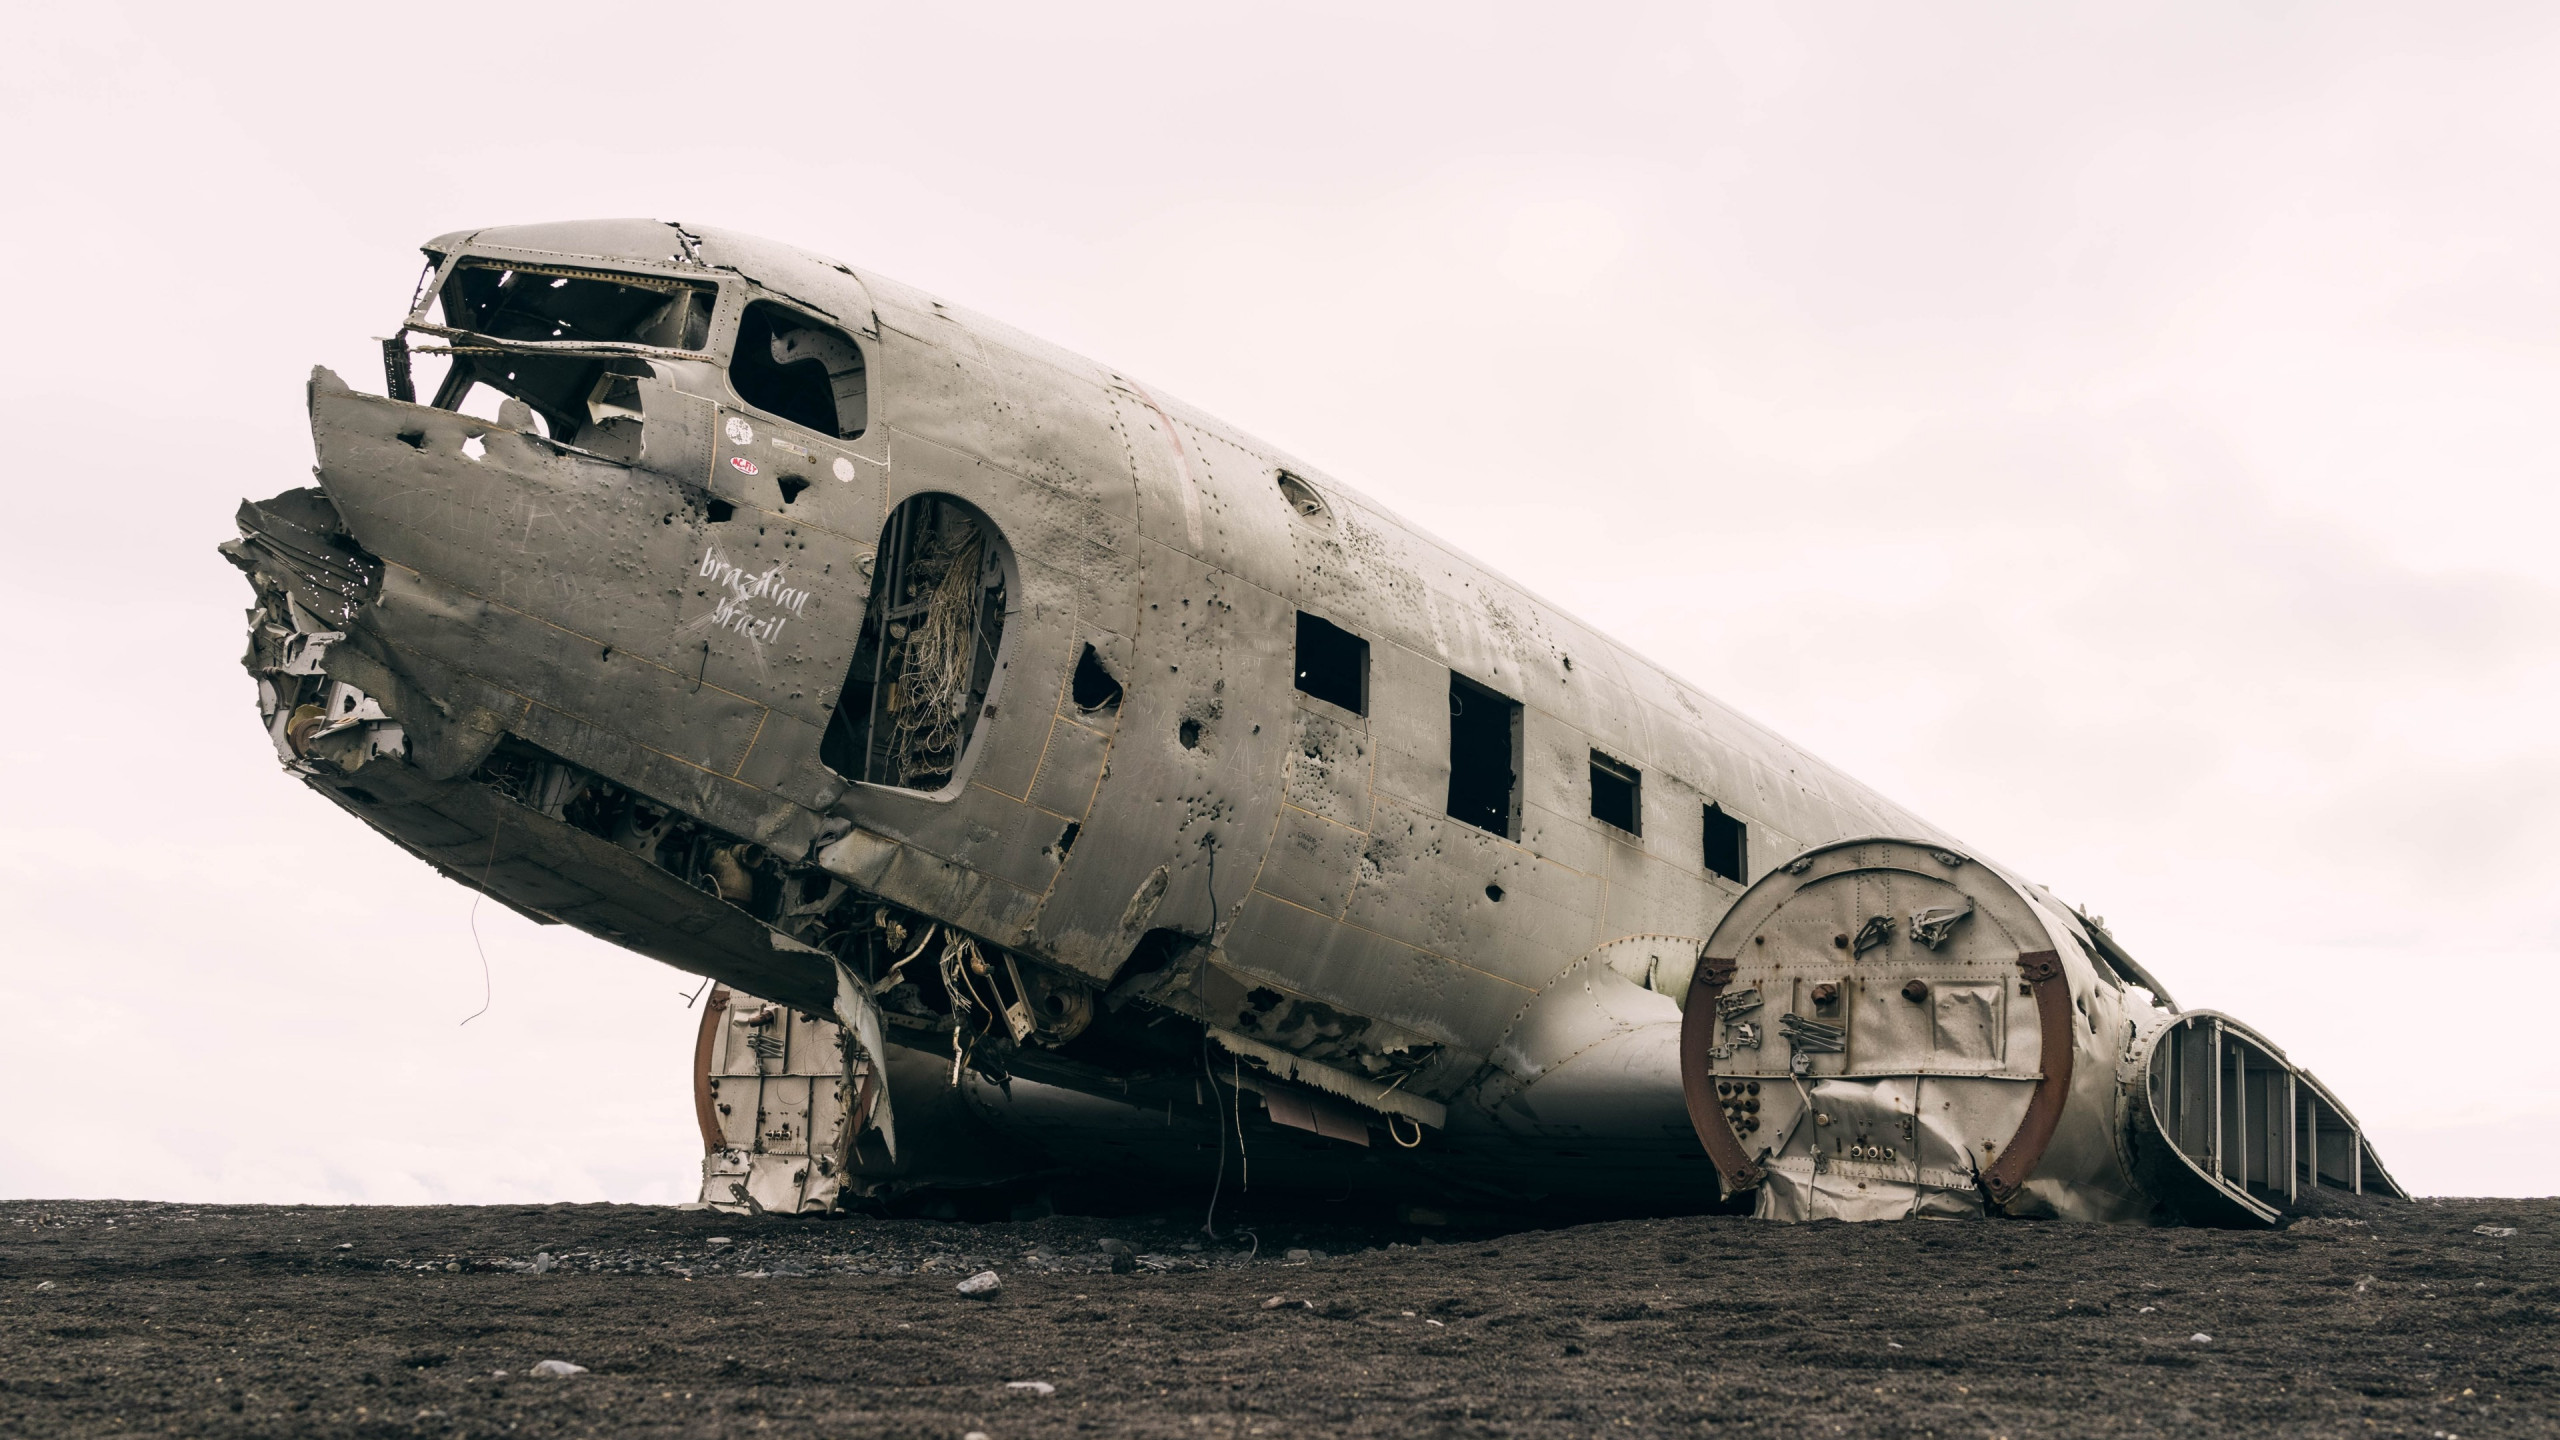 Wrecked airplane wallpaper 2560x1440